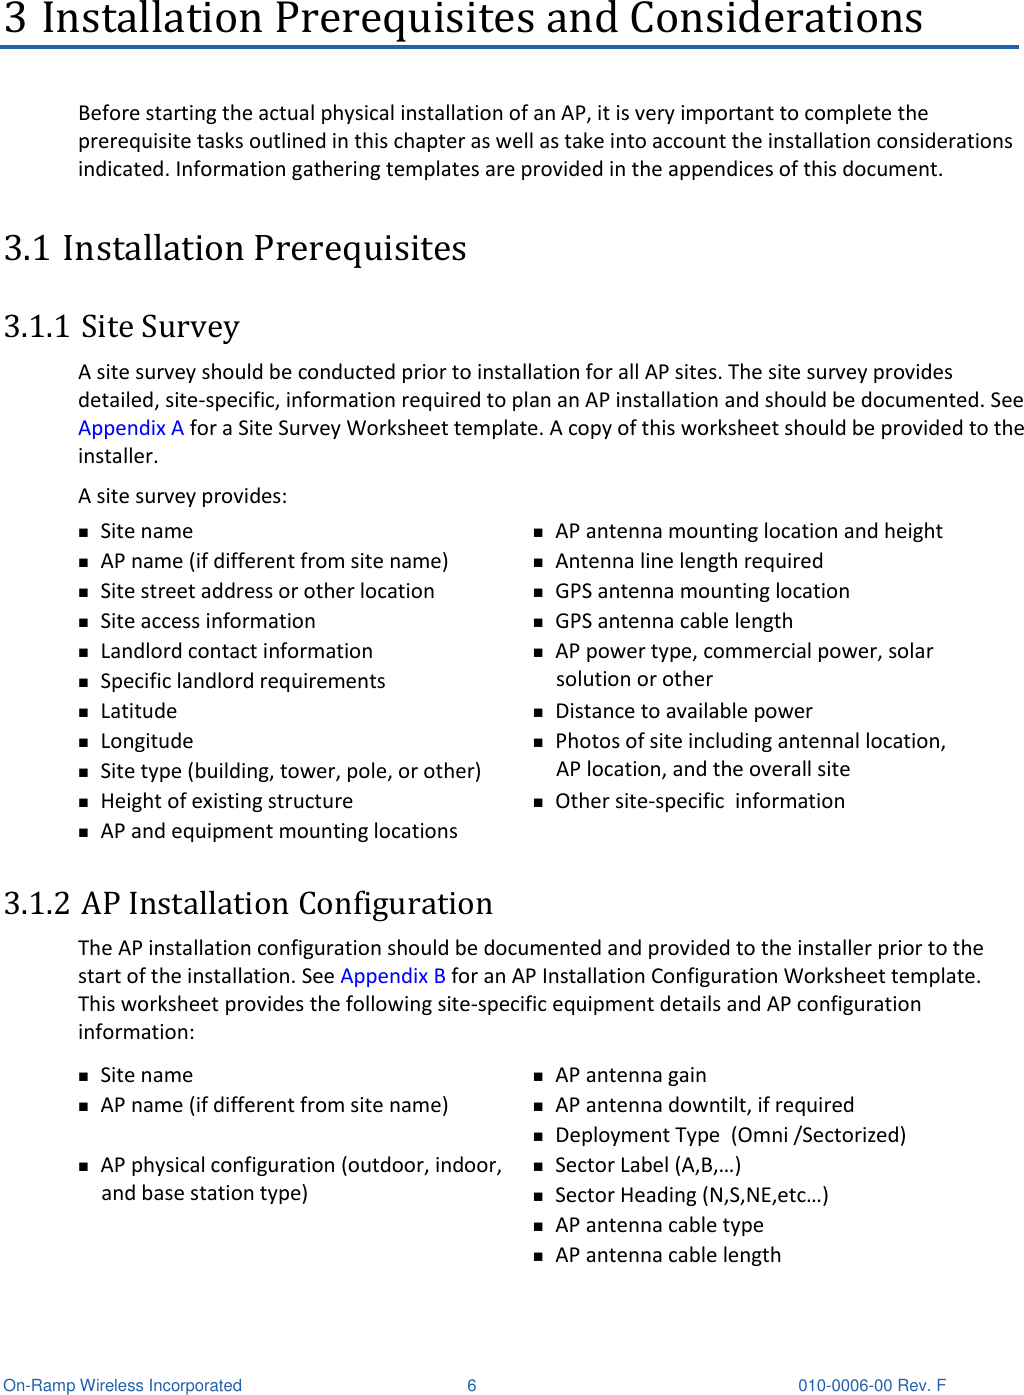  On-Ramp Wireless Incorporated  6  010-0006-00 Rev. F 3 Installation Prerequisites and Considerations Before starting the actual physical installation of an AP, it is very important to complete the prerequisite tasks outlined in this chapter as well as take into account the installation considerations indicated. Information gathering templates are provided in the appendices of this document. 3.1 Installation Prerequisites 3.1.1 Site Survey A site survey should be conducted prior to installation for all AP sites. The site survey provides detailed, site-specific, information required to plan an AP installation and should be documented. See Appendix A for a Site Survey Worksheet template. A copy of this worksheet should be provided to the installer.  A site survey provides:  Site name  AP antenna mounting location and height  AP name (if different from site name)  Antenna line length required  Site street address or other location  GPS antenna mounting location  Site access information  GPS antenna cable length  Landlord contact information  Specific landlord requirements   AP power type, commercial power, solar solution or other  Latitude  Distance to available power  Longitude  Site type (building, tower, pole, or other)  Photos of site including antennal location, AP location, and the overall site  Height of existing structure  Other site-specific  information  AP and equipment mounting locations  3.1.2 AP Installation Configuration The AP installation configuration should be documented and provided to the installer prior to the start of the installation. See Appendix B for an AP Installation Configuration Worksheet template. This worksheet provides the following site-specific equipment details and AP configuration information:  Site name  AP antenna gain   AP name (if different from site name)  AP antenna downtilt, if required  Deployment Type  (Omni /Sectorized)  AP physical configuration (outdoor, indoor, and base station type)  Sector Label (A,B,…)  Sector Heading (N,S,NE,etc…)  AP antenna cable type  AP antenna cable length 